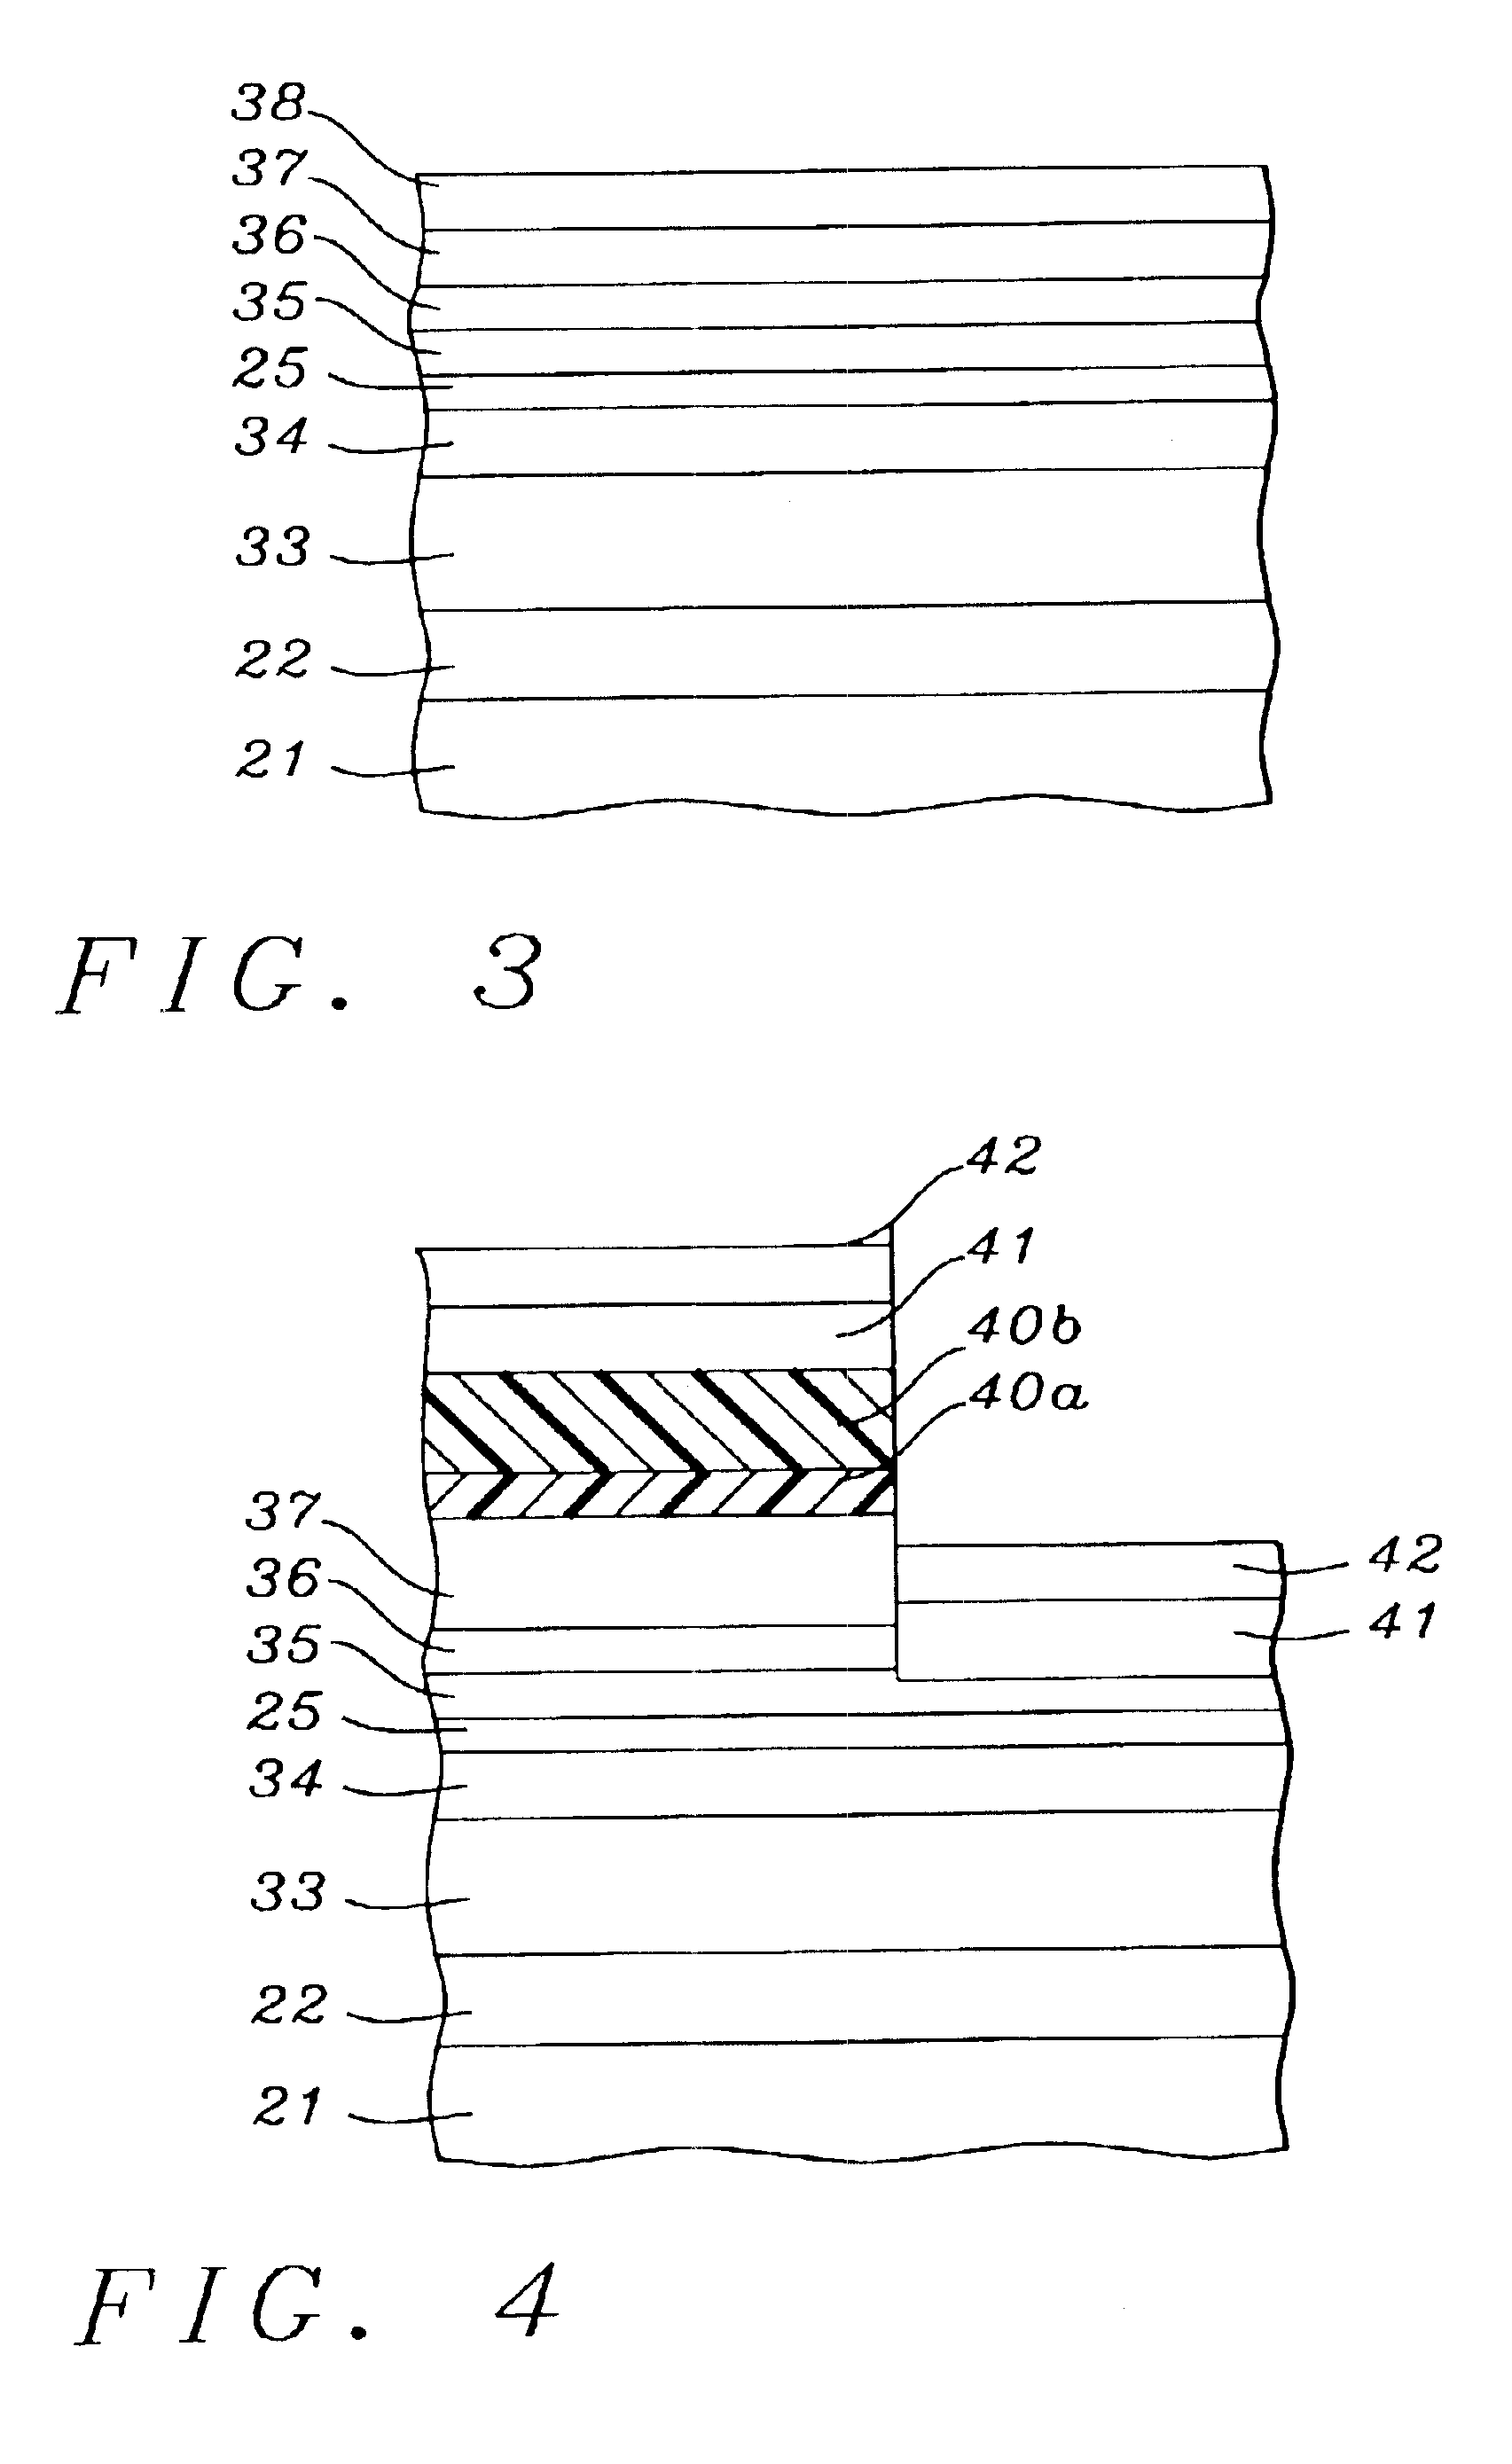 Process for manufacturing a read head